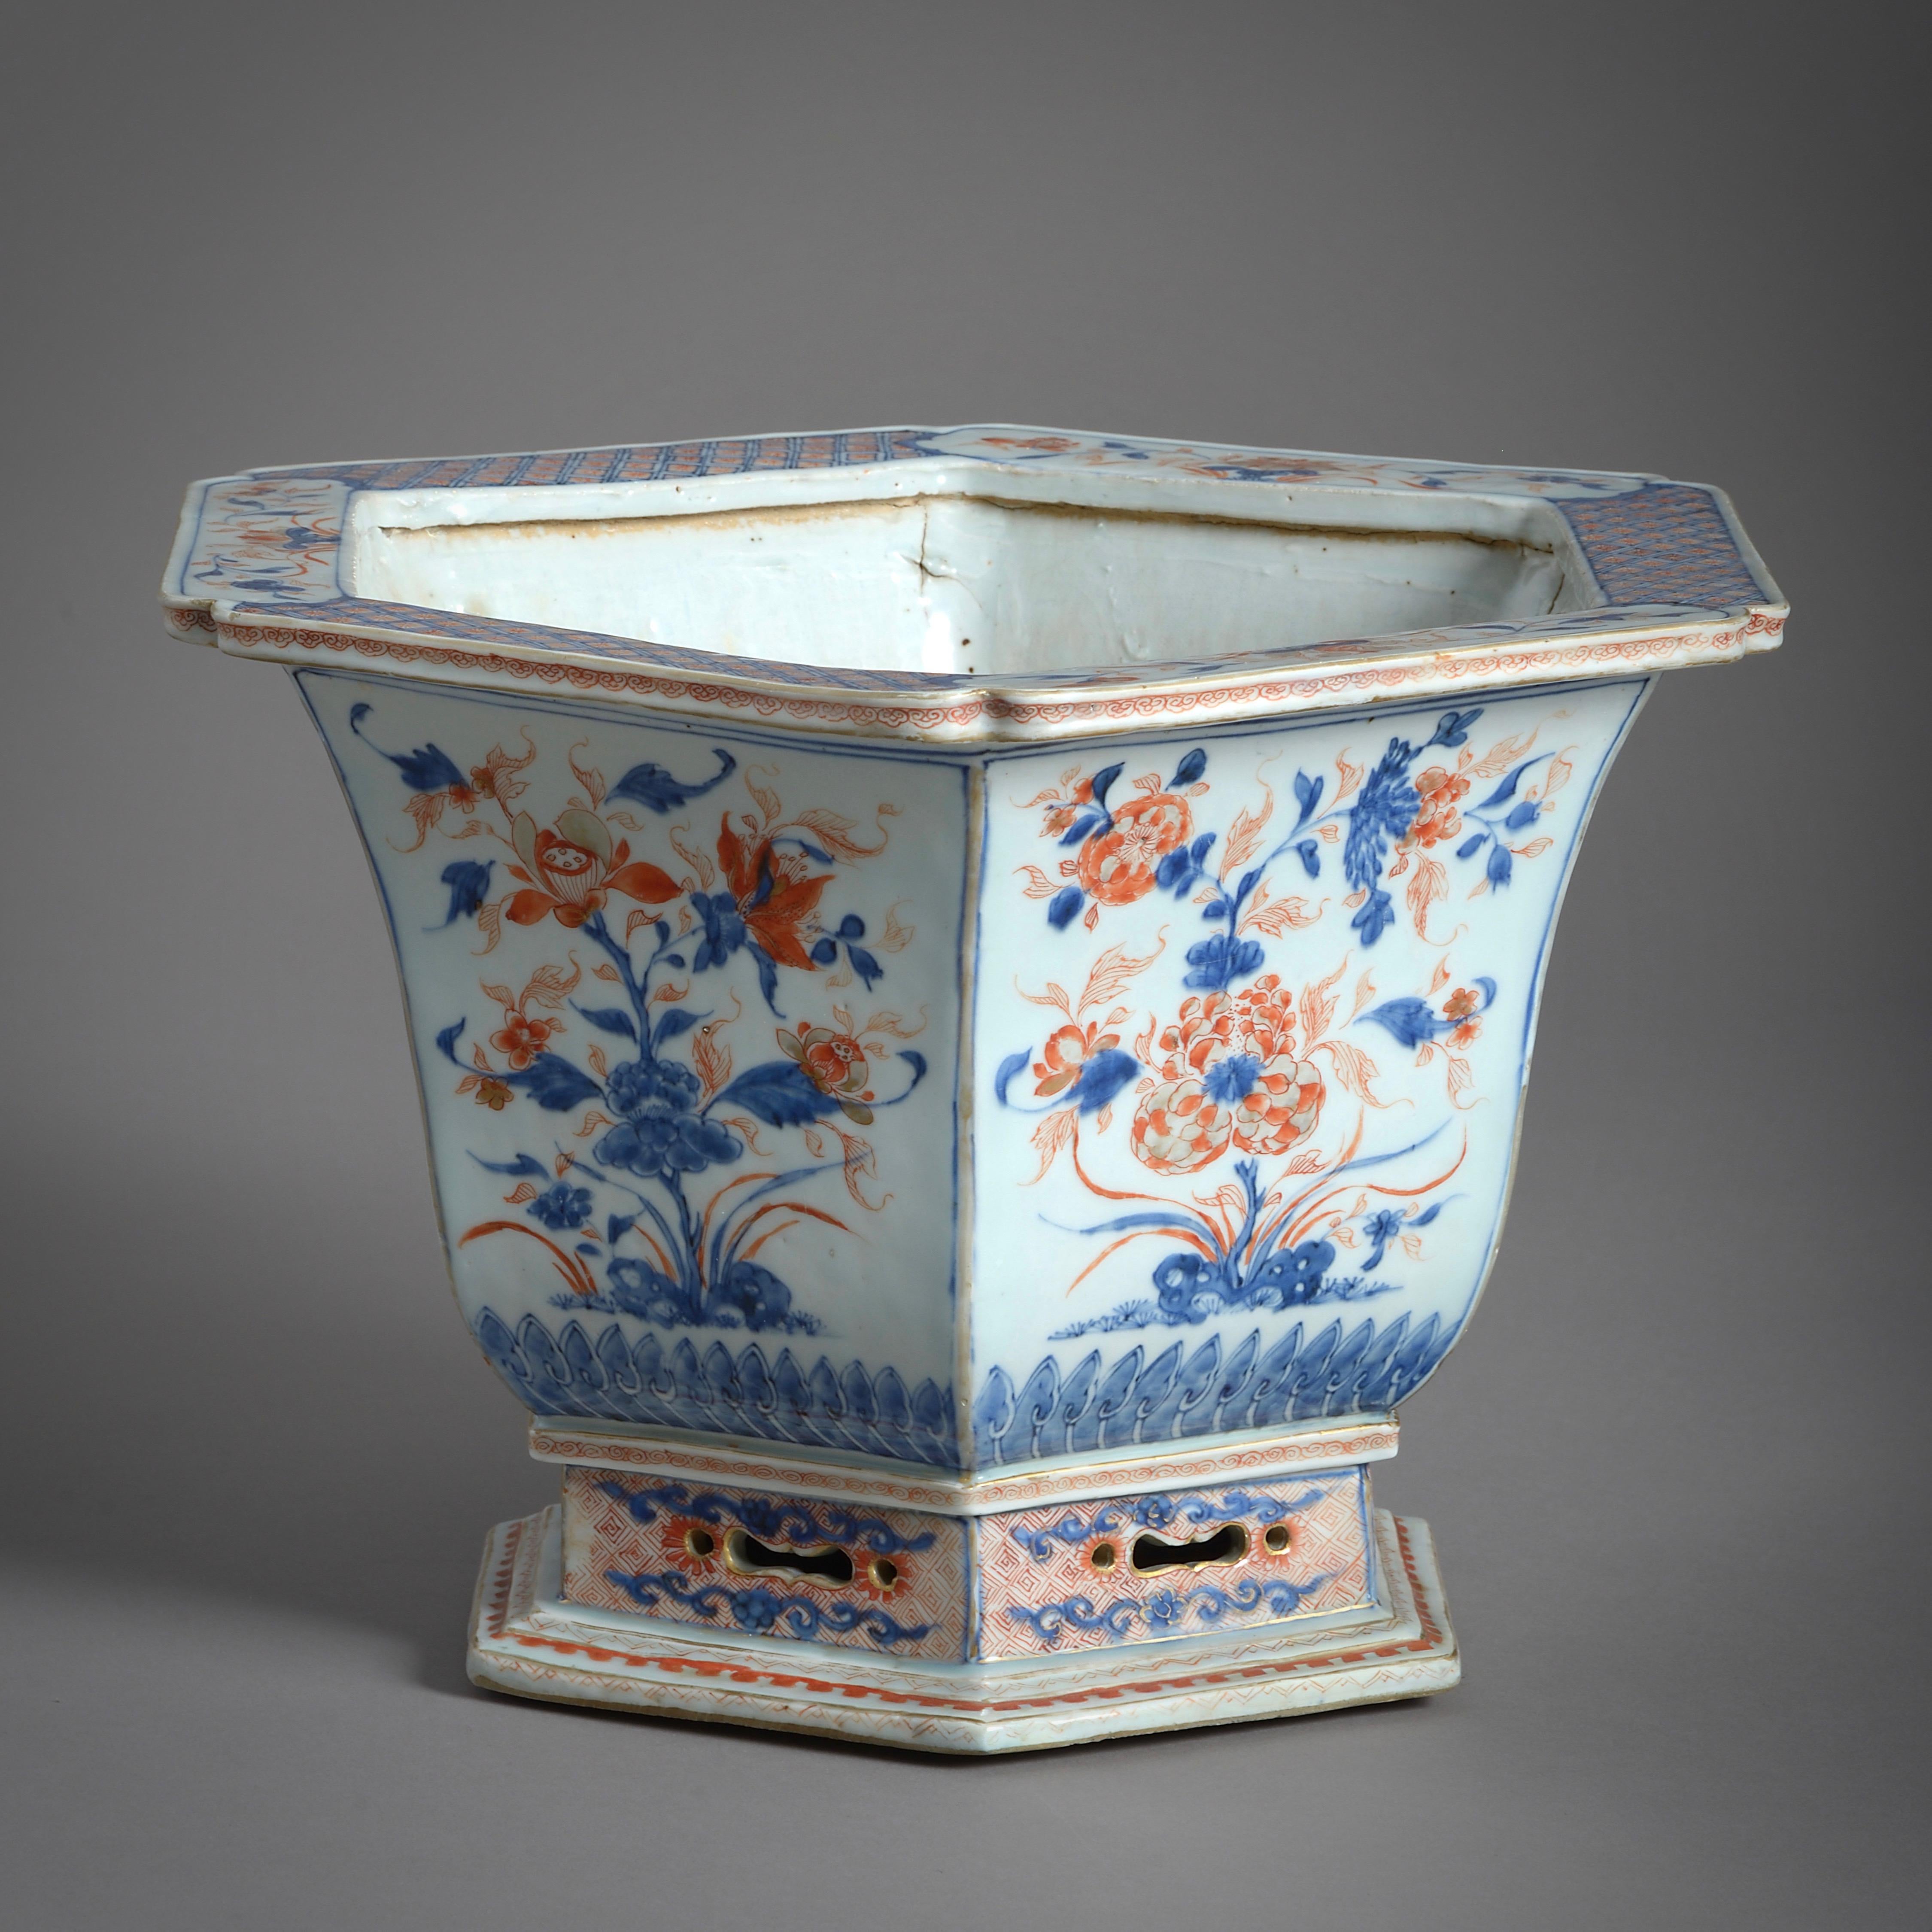 A Chien-Lung Chinese Imari hexagonal jardinière painted with flowering shrubs, 18th century.